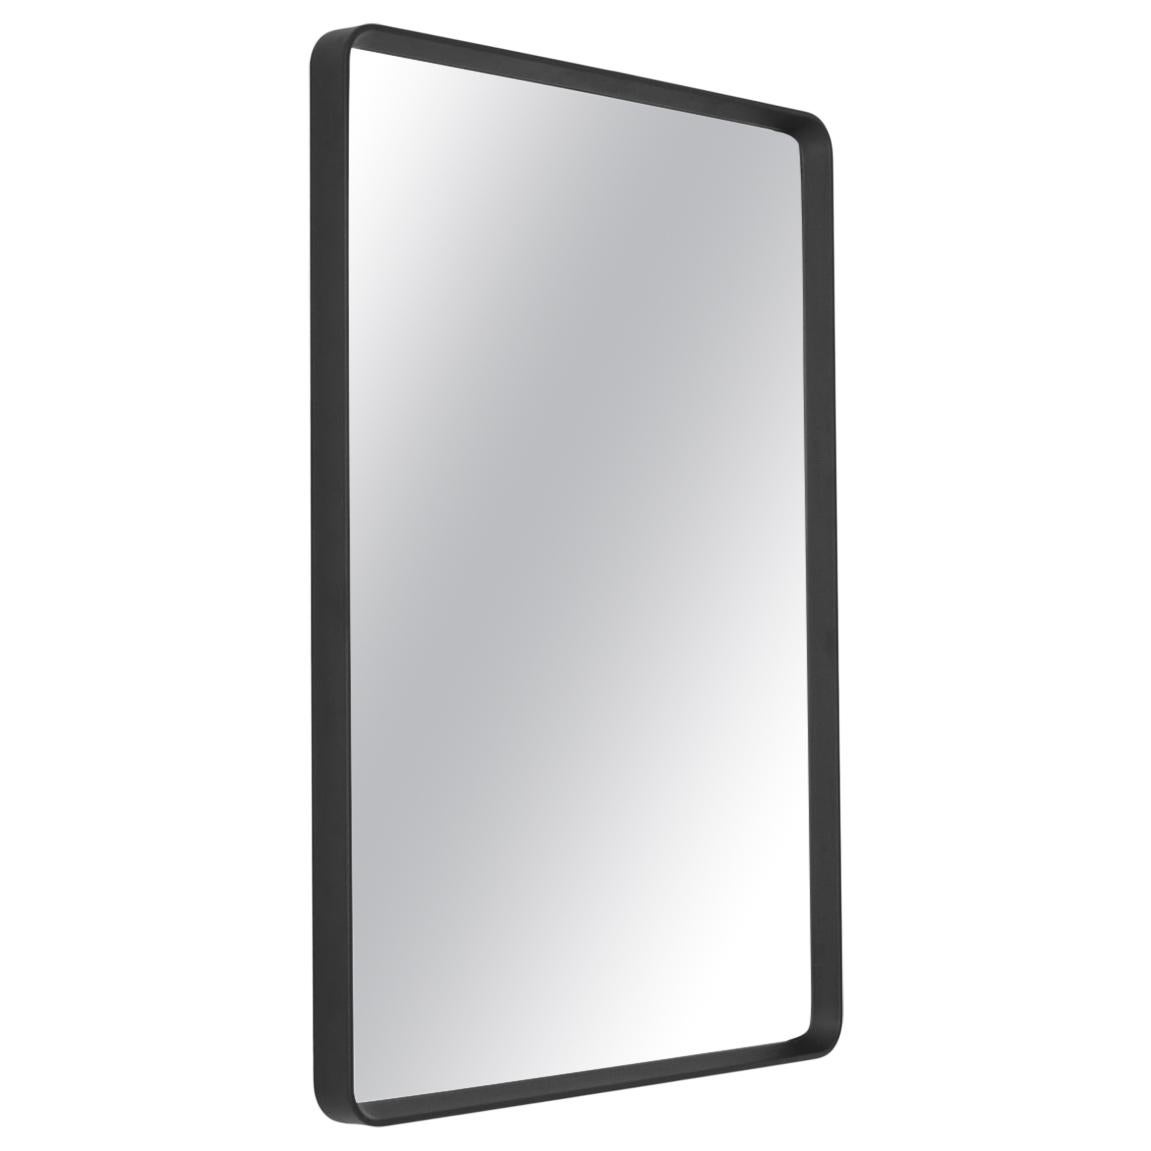 Norm Wall Mirror, Black For Sale